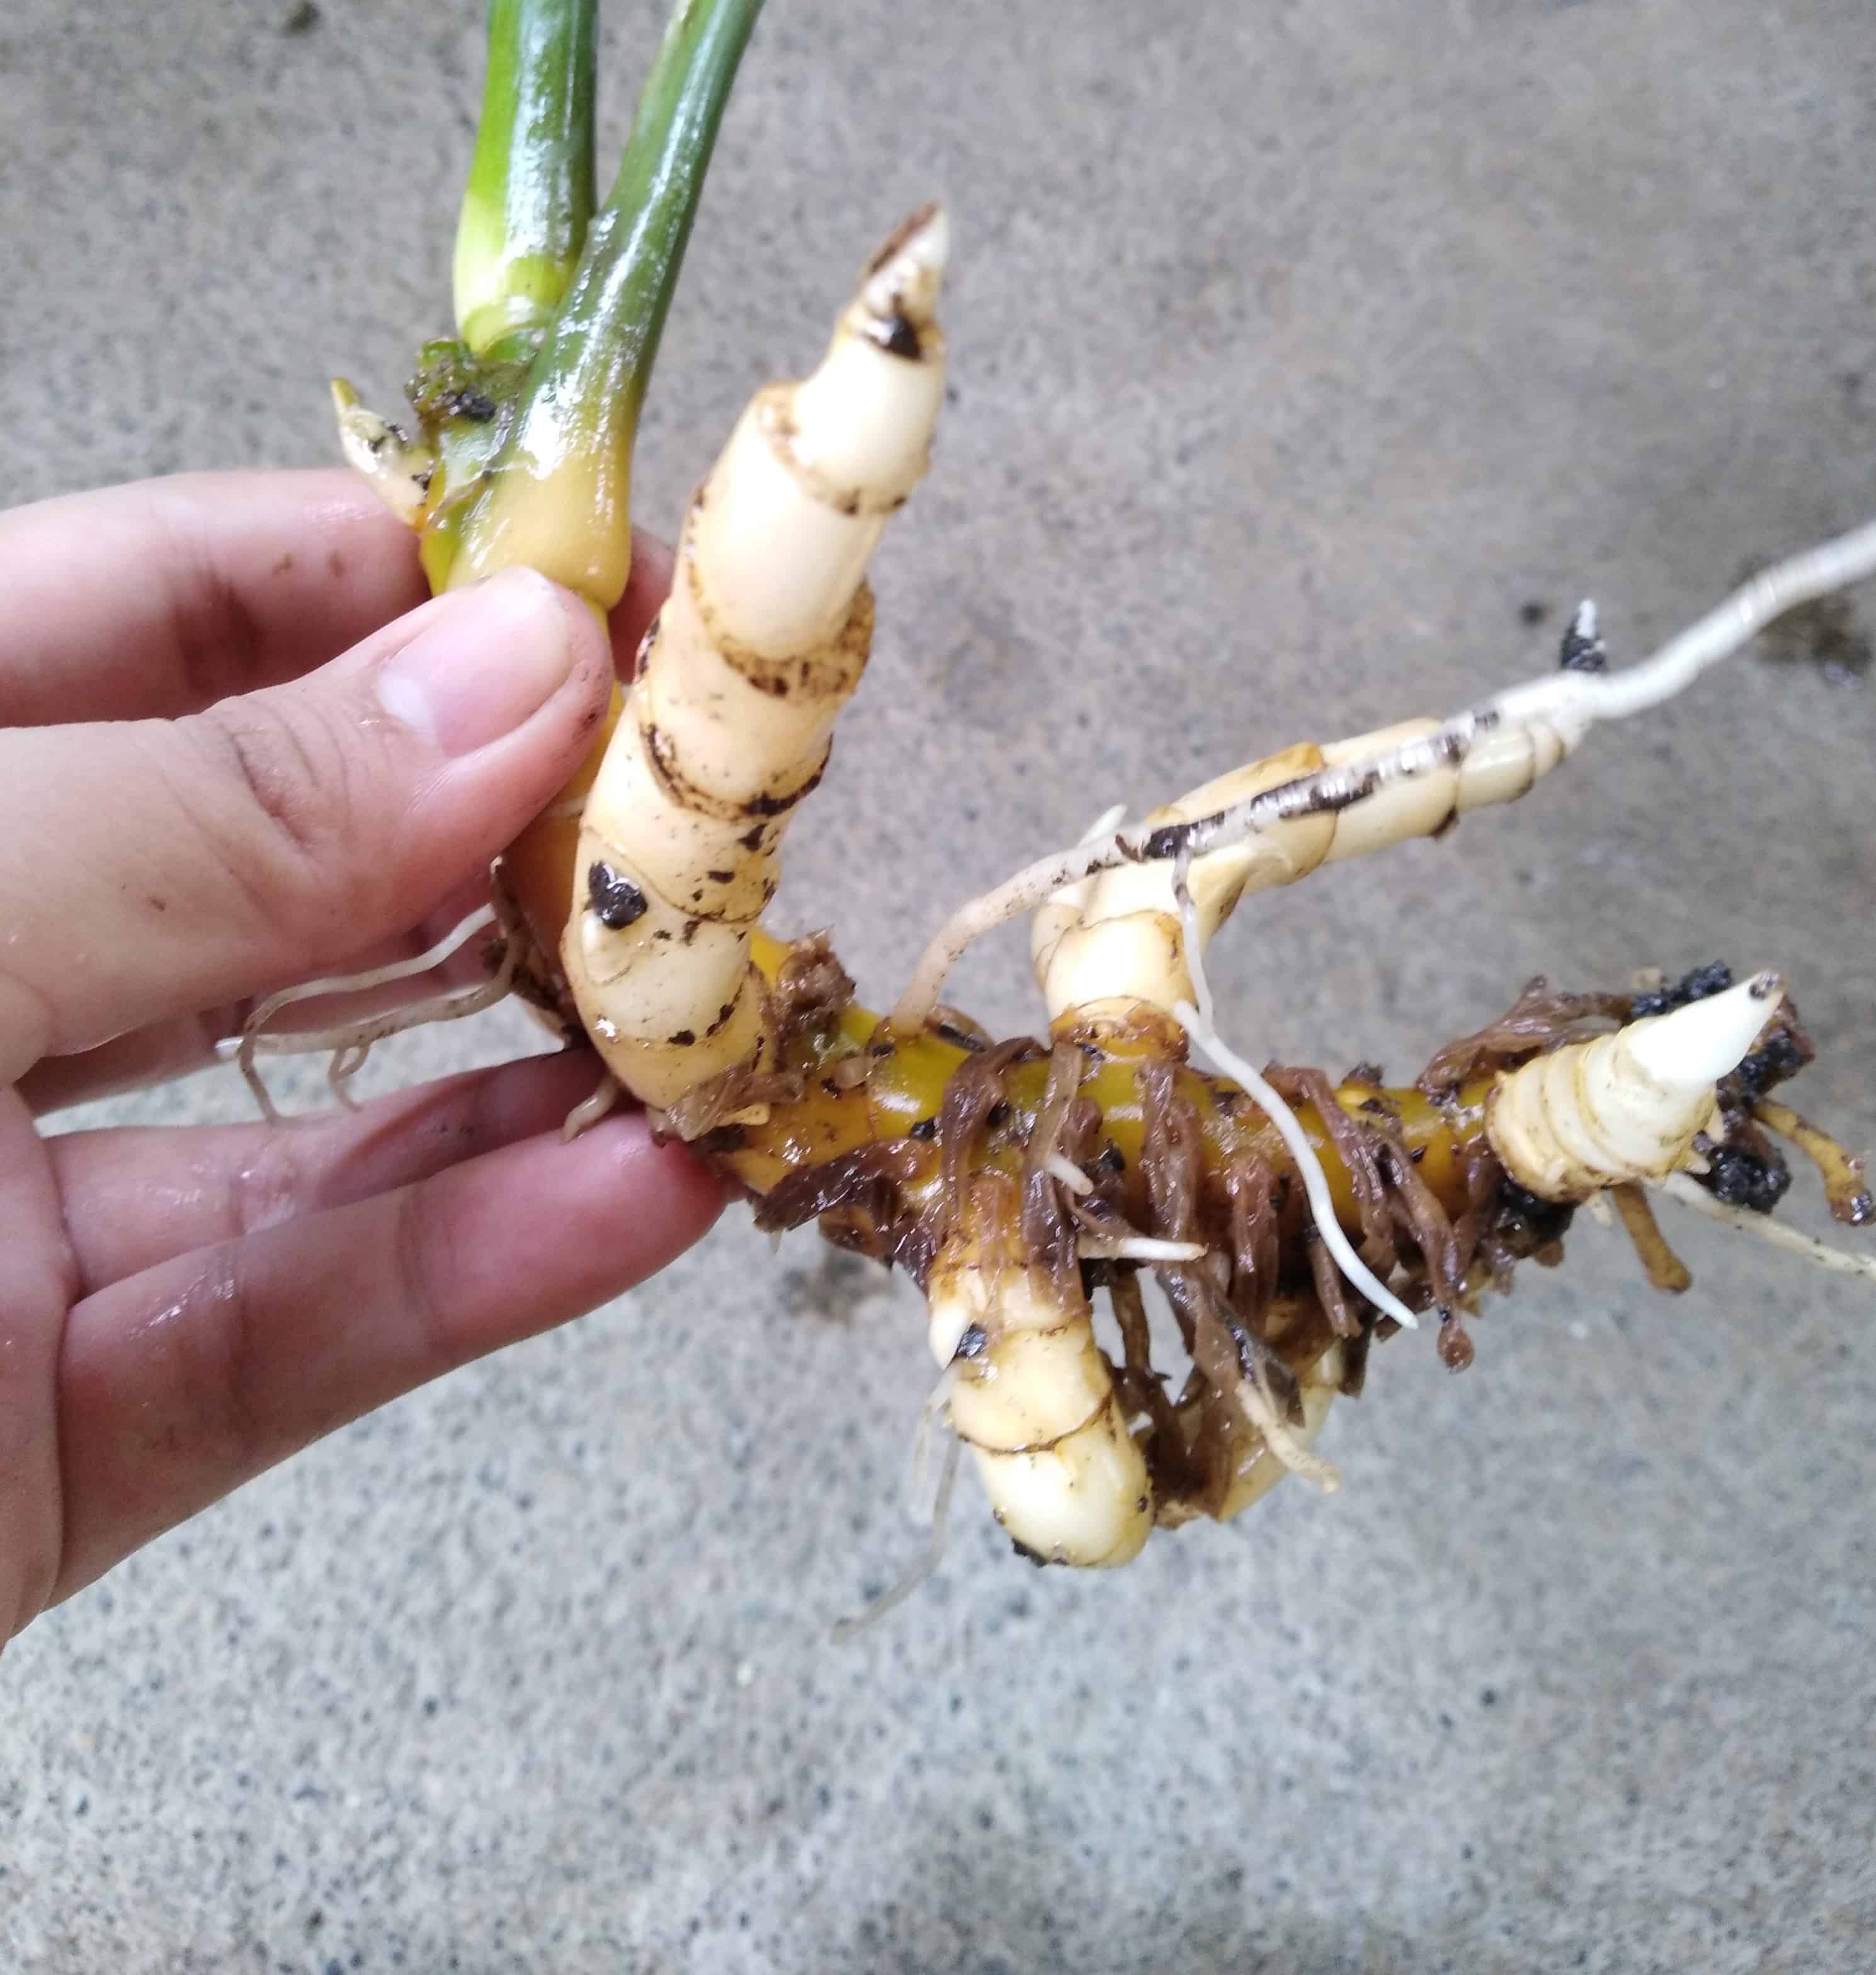 A tuberous rhizome with dead, brown roots.